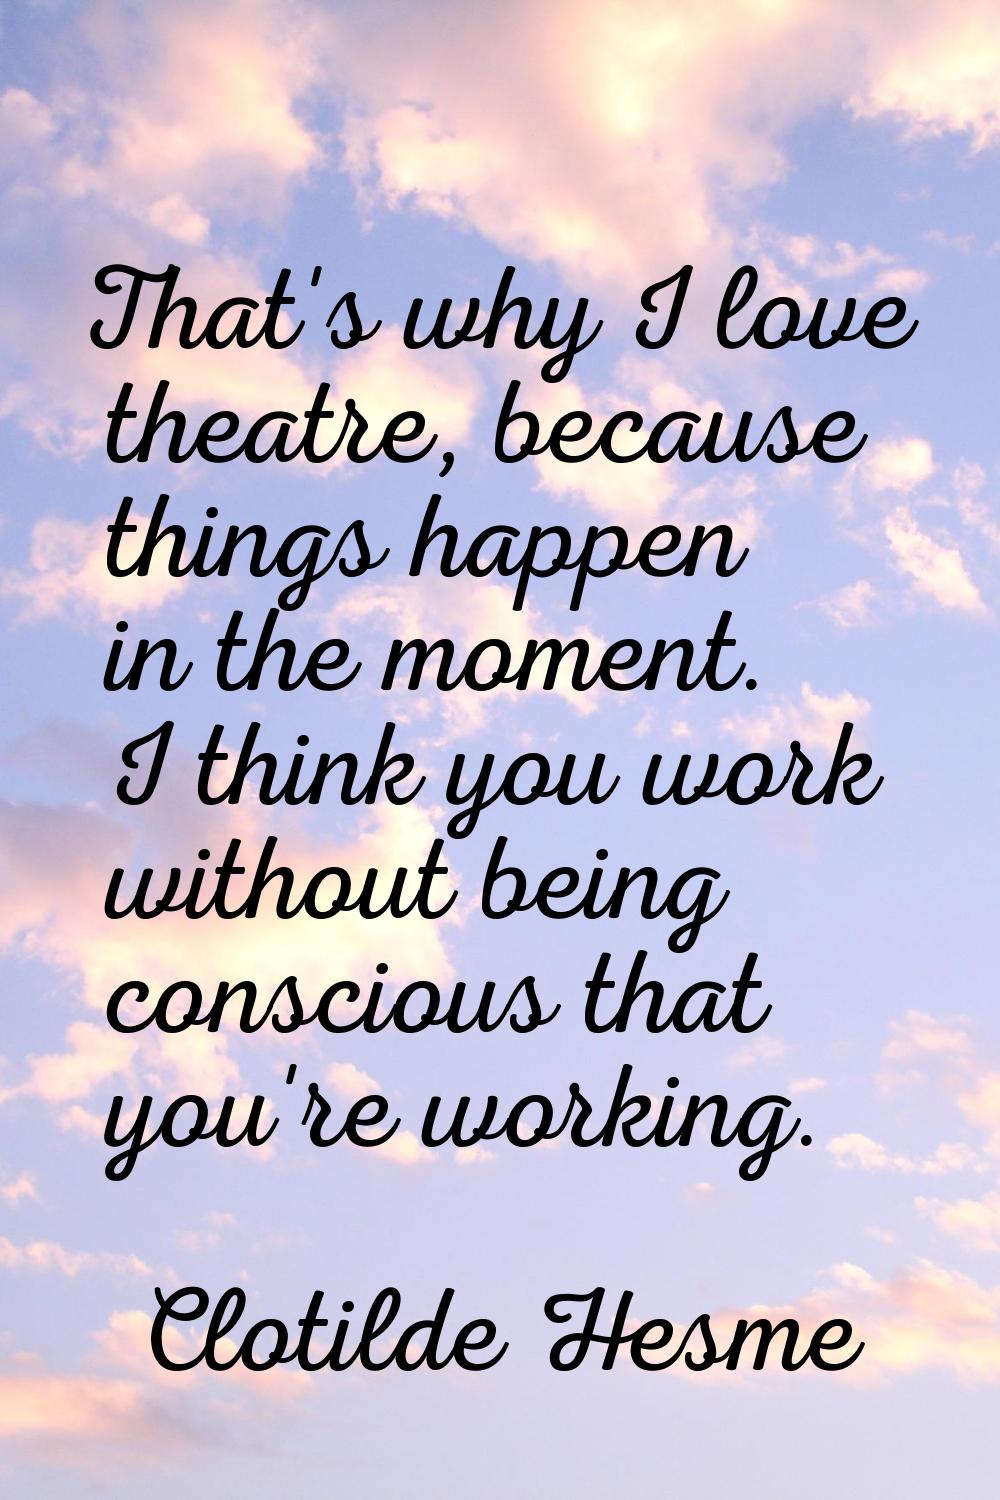 That's why I love theatre, because things happen in the moment. I think you work without being cons